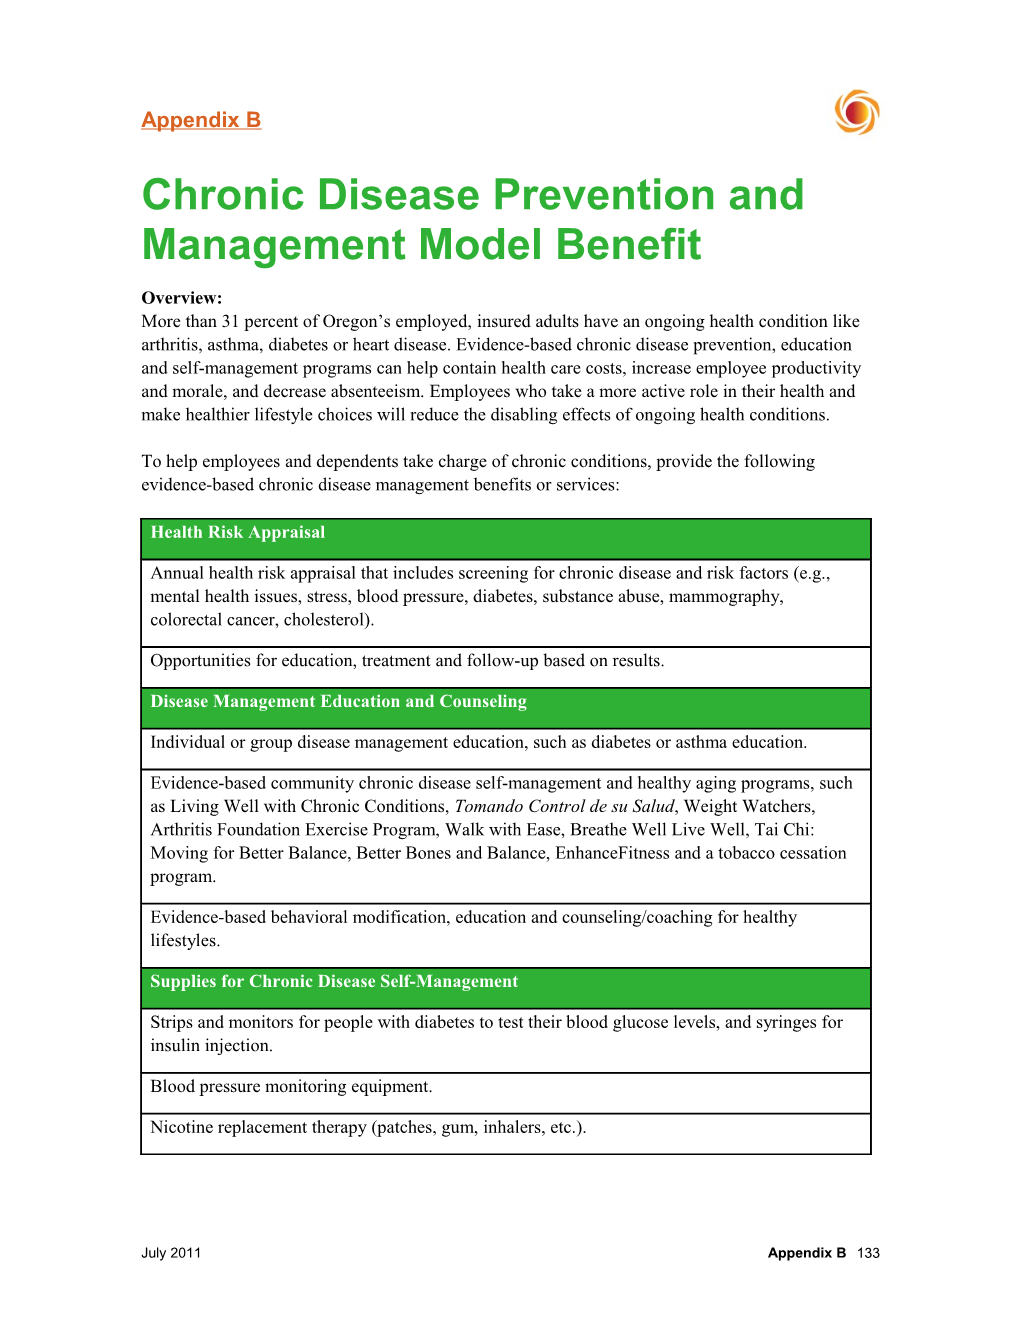 Chronic Disease Prevention and Management Model Benefit